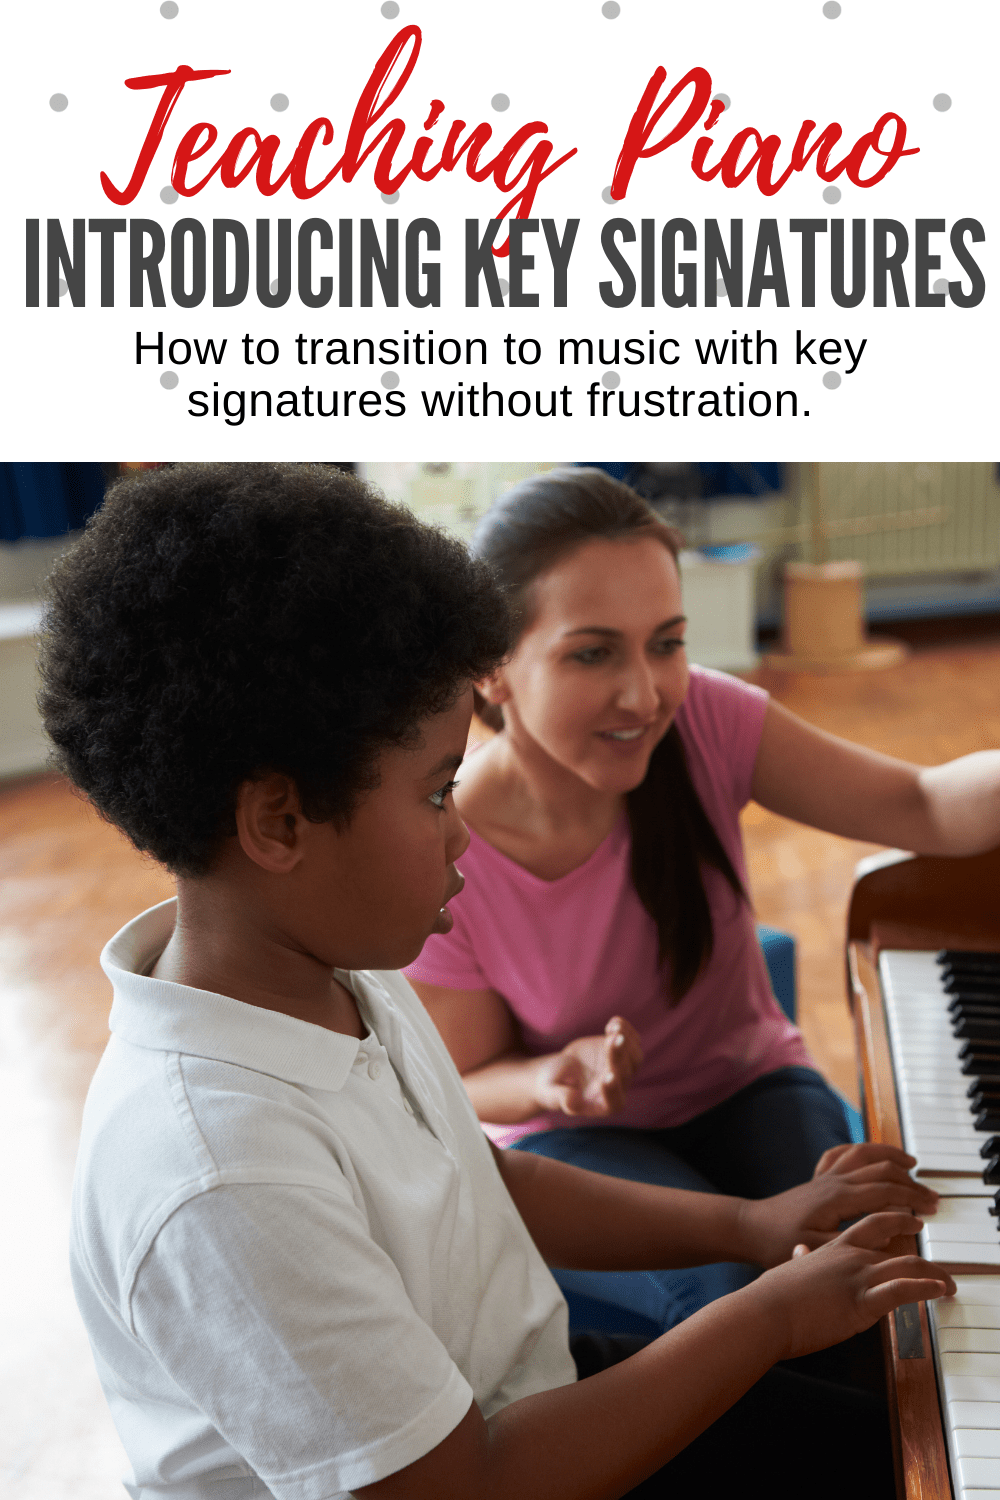 Use this highlighter strategy when introducing key signatures to piano students.